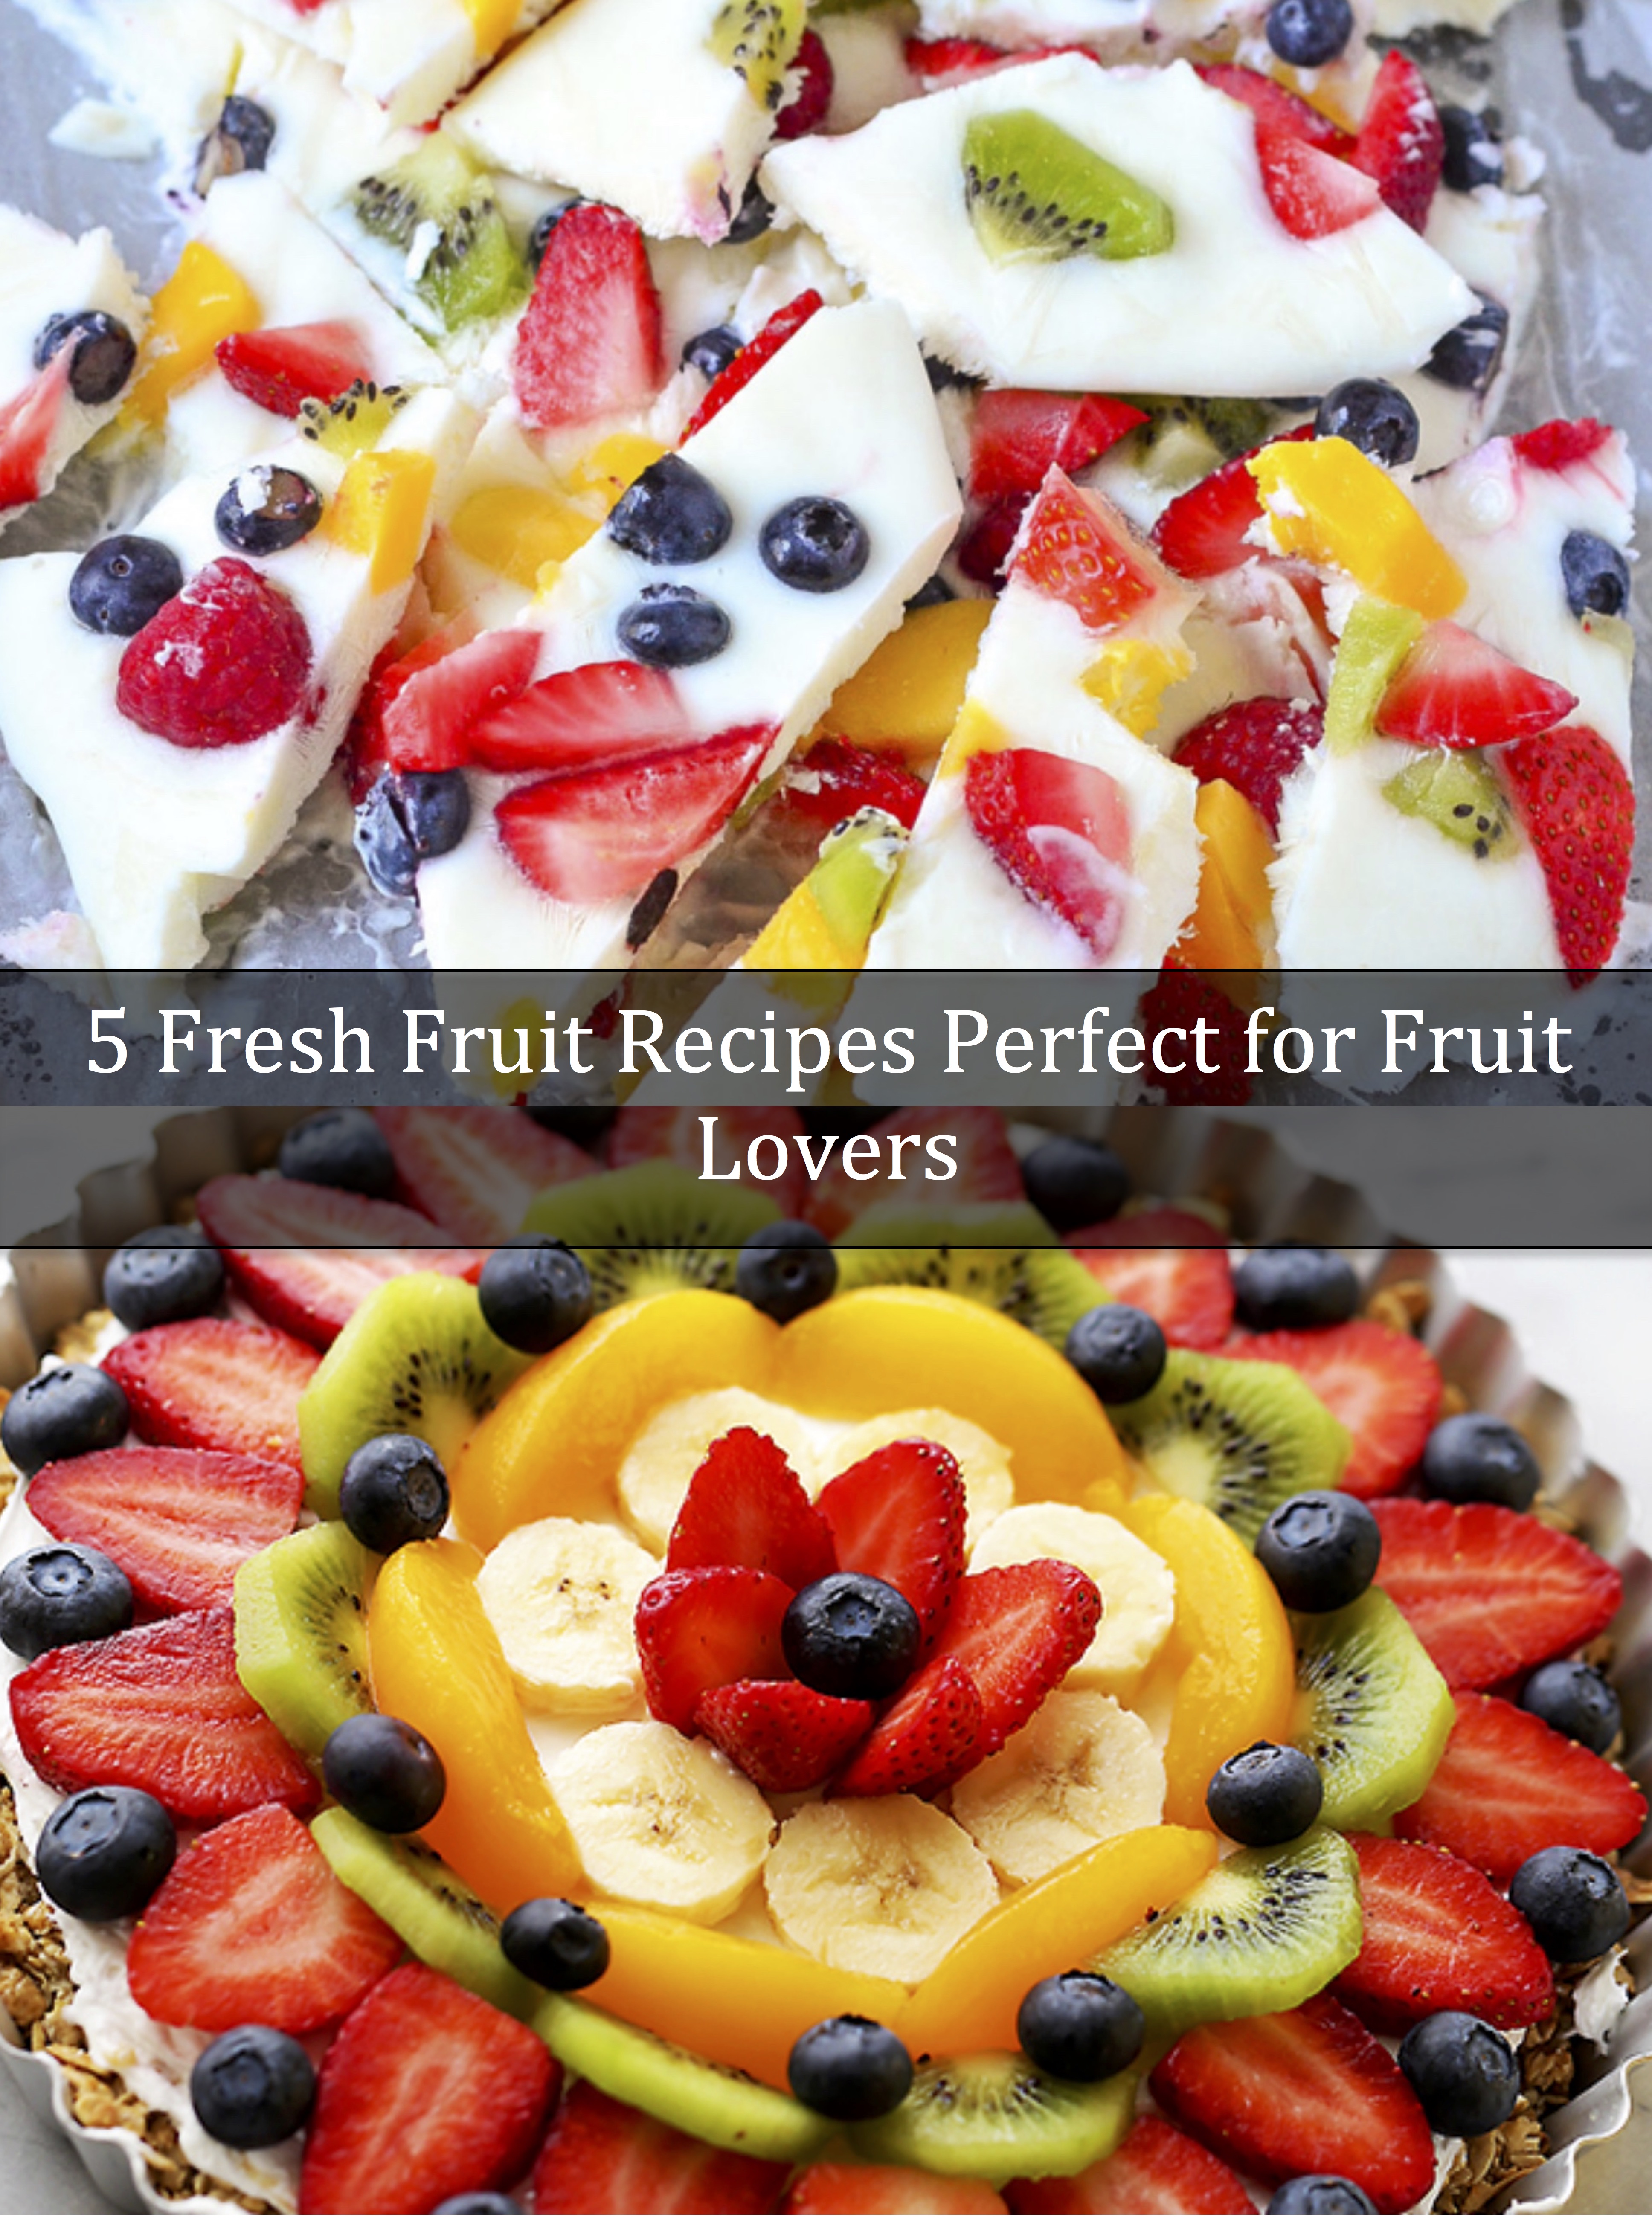 5 Fresh Fruit Recipes Perfect for Fruit Lovers